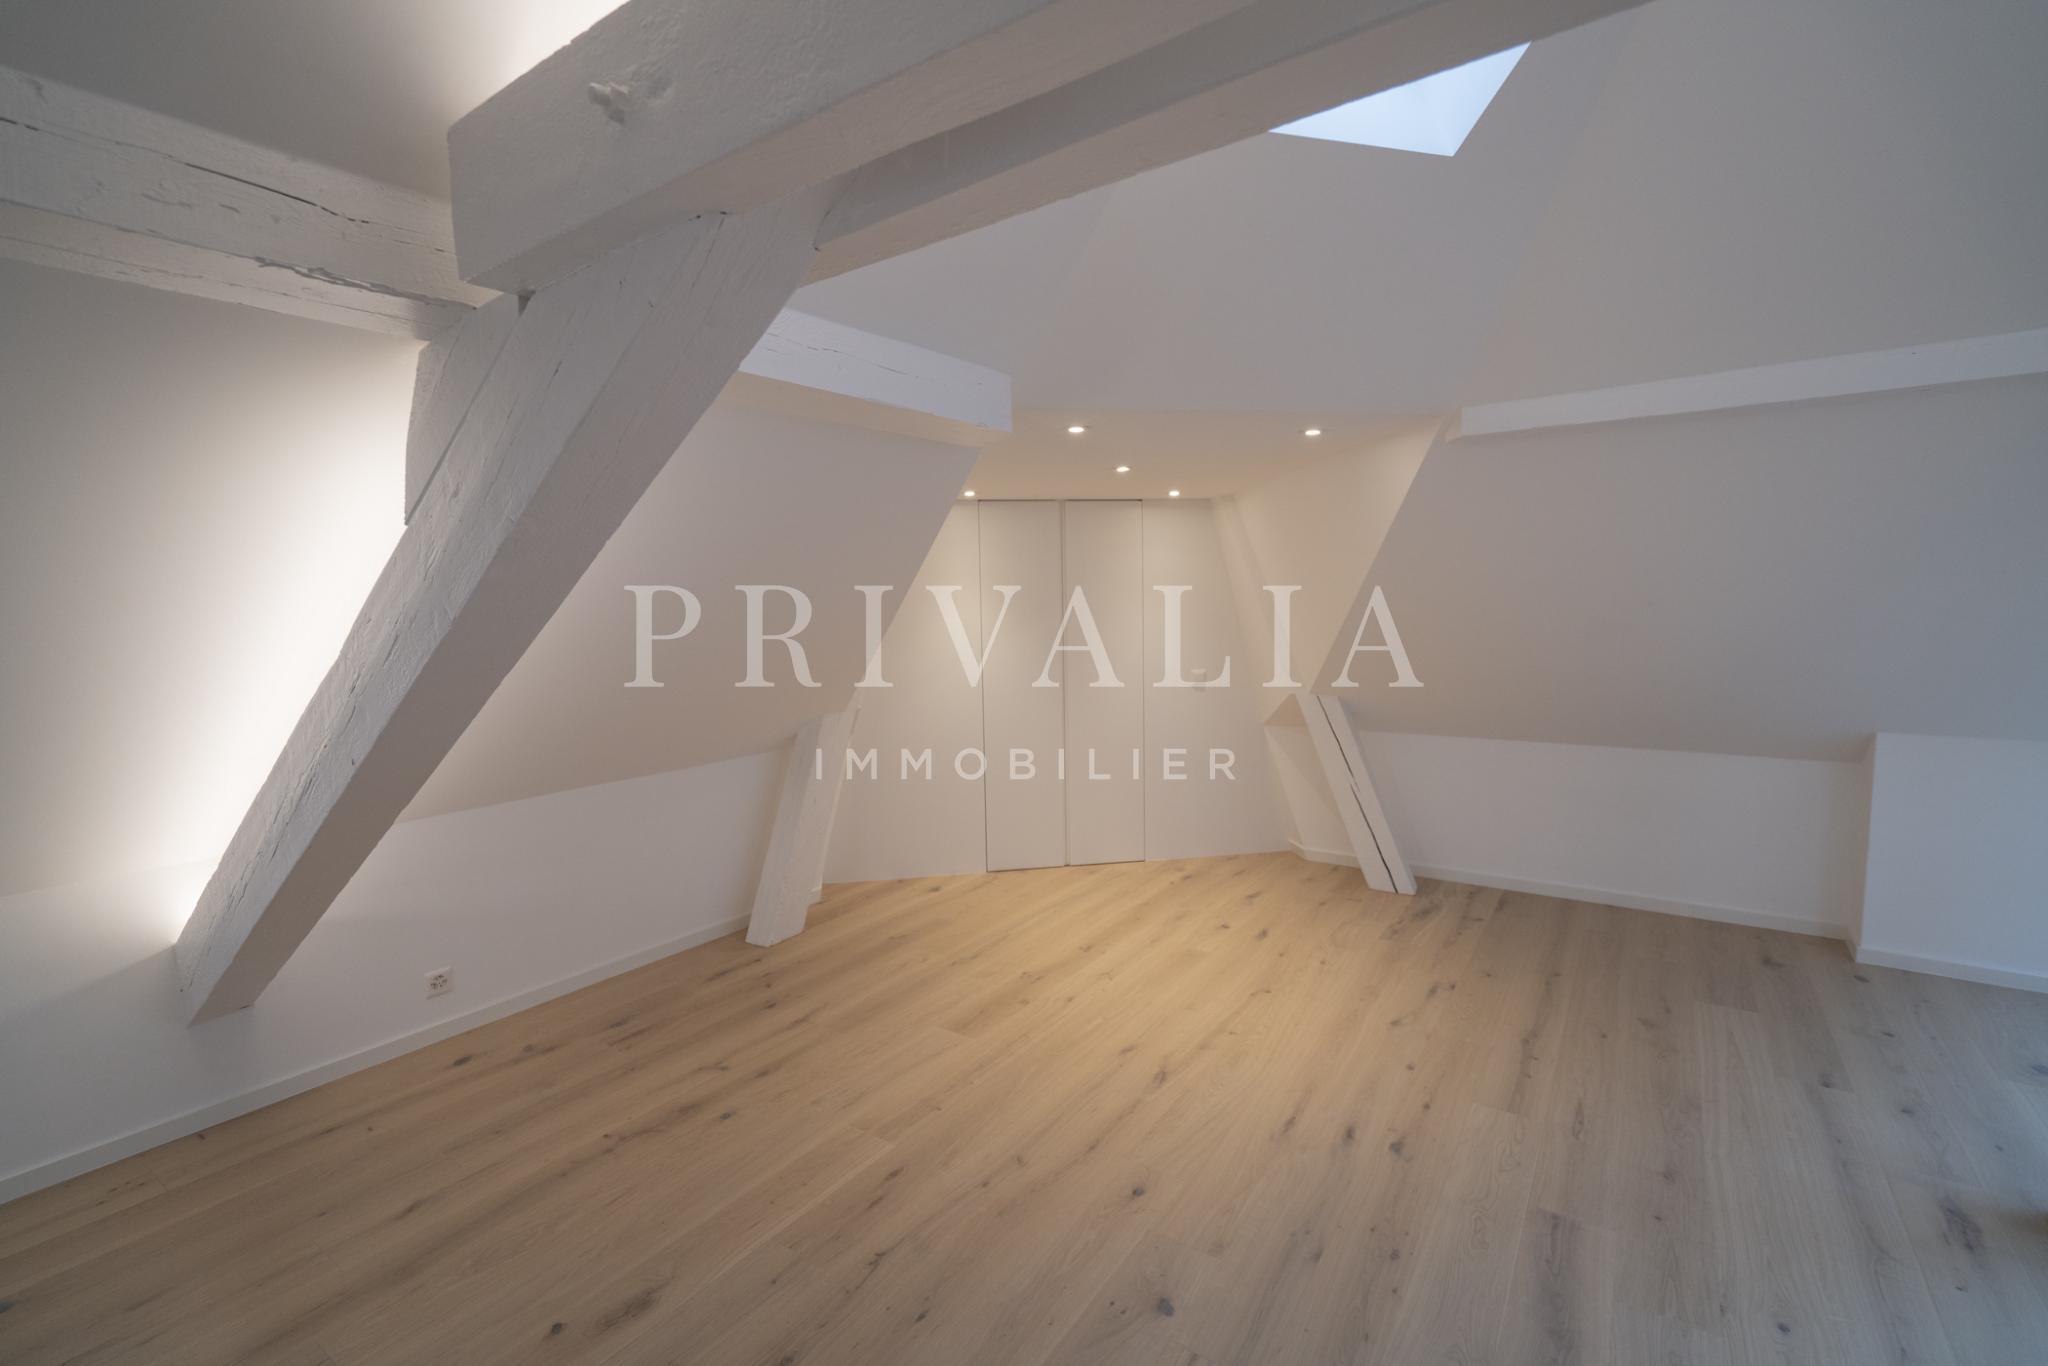 PrivaliaBeautiful apartment completely renovated